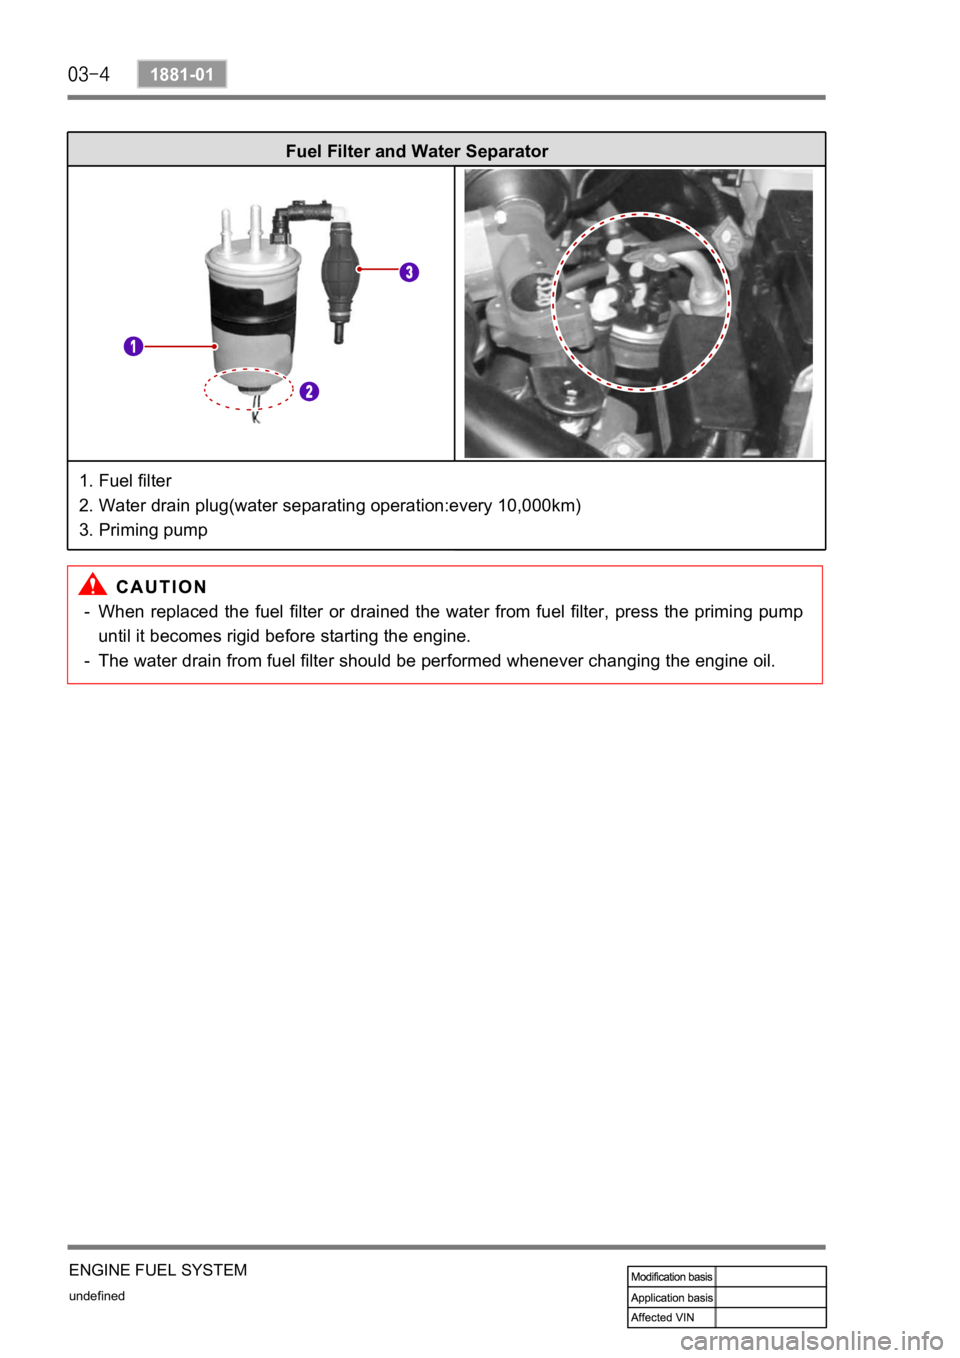 SSANGYONG KYRON 2008  Service Manual undefined
1881-01
ENGINE FUEL SYSTEM
 Fuel Filter and Water Separator
1. Fuel filter 
2. Water drain plug(water separating operation:every 10,000km)
3. Priming pump
When  replaced  the  fuel  filter  